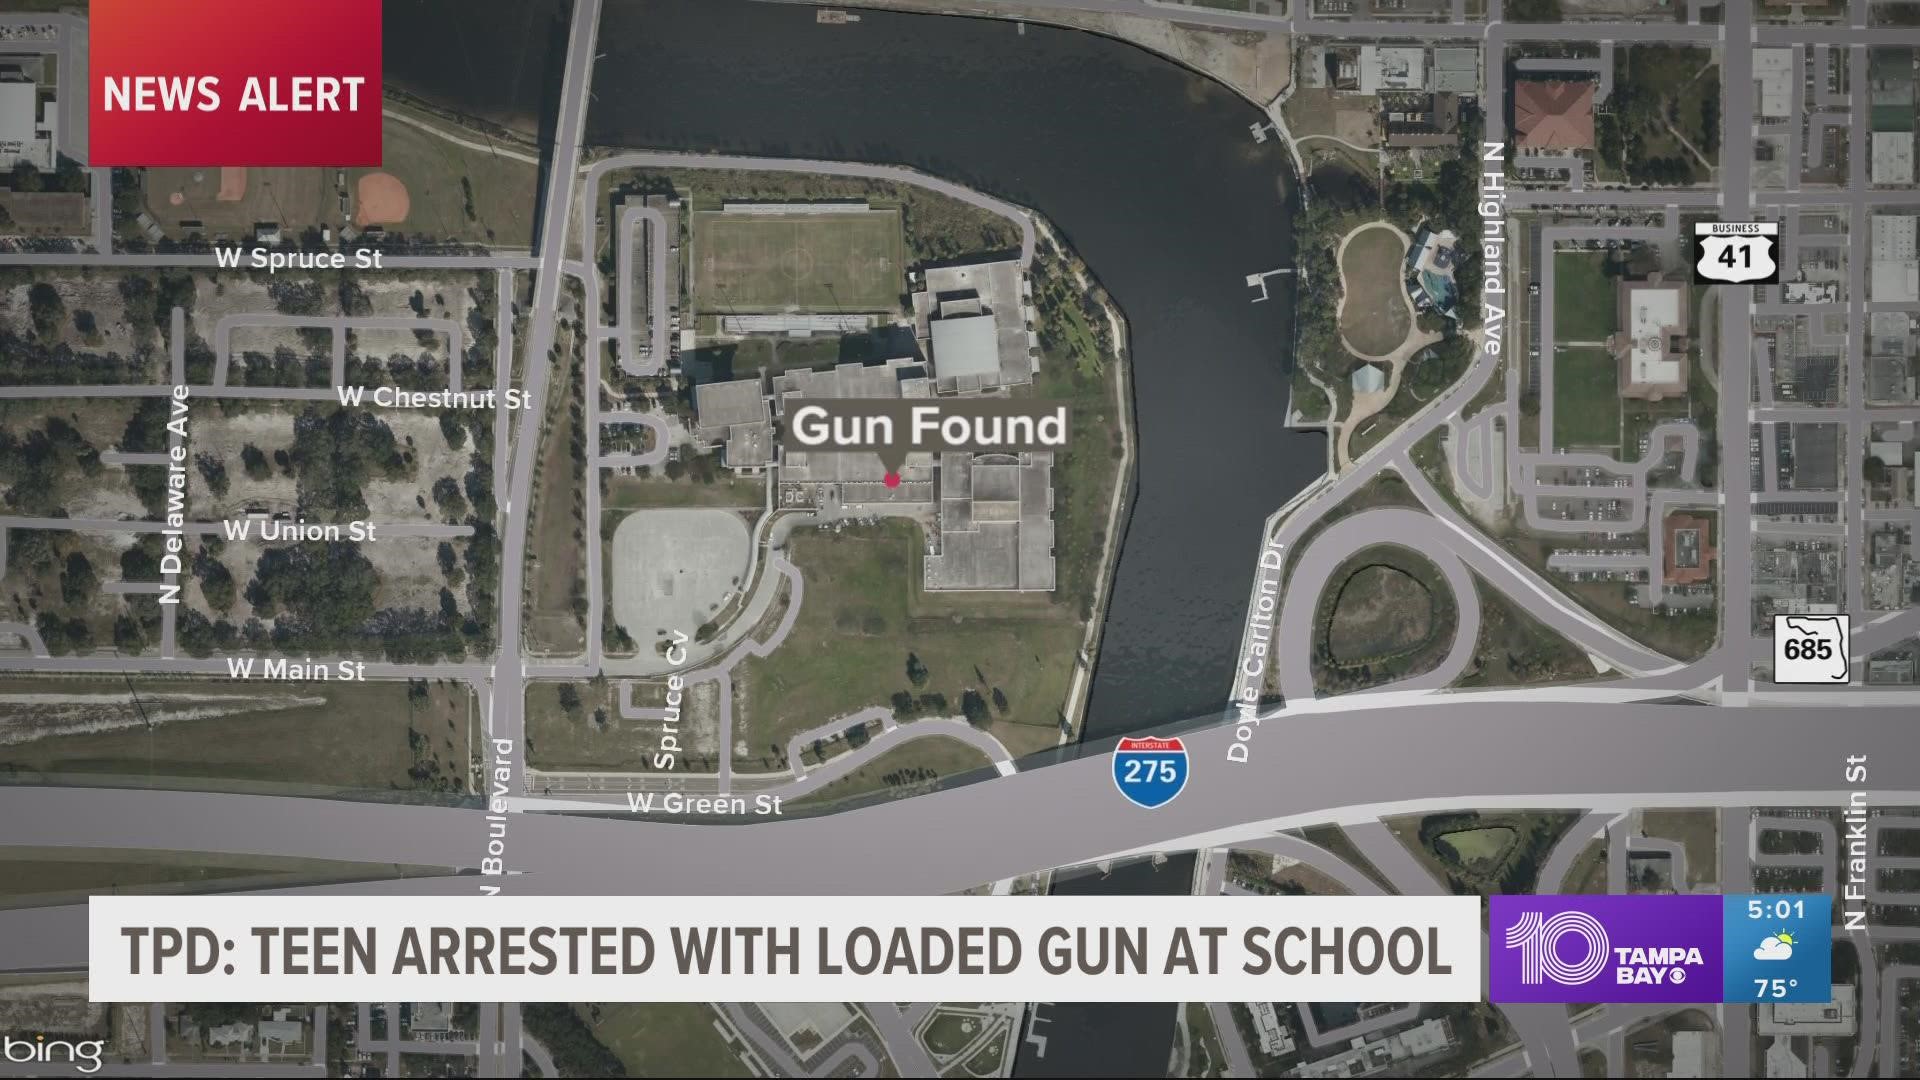 The 16-year-old was charged with possession of a firearm on school property.